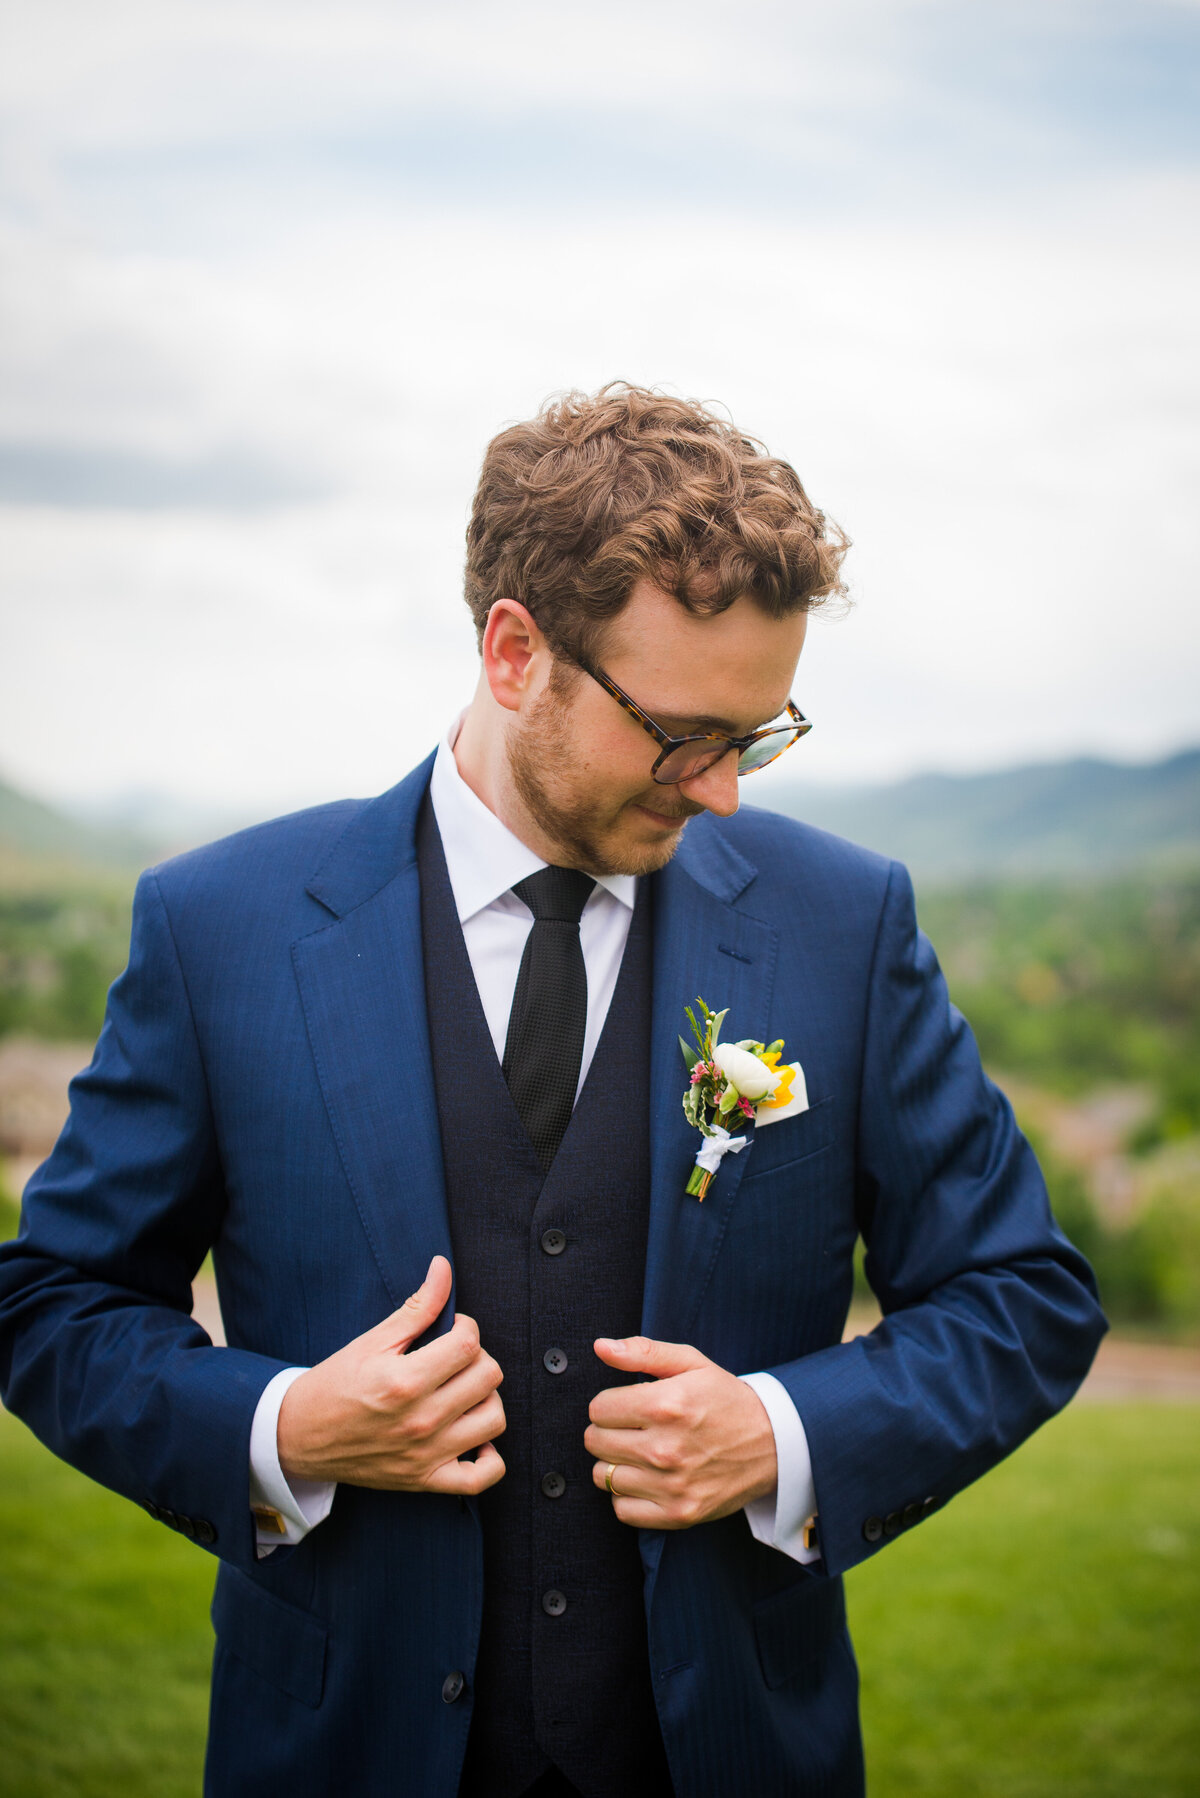 A groom adjusts his suit jacket and glances down at his boutonnière.